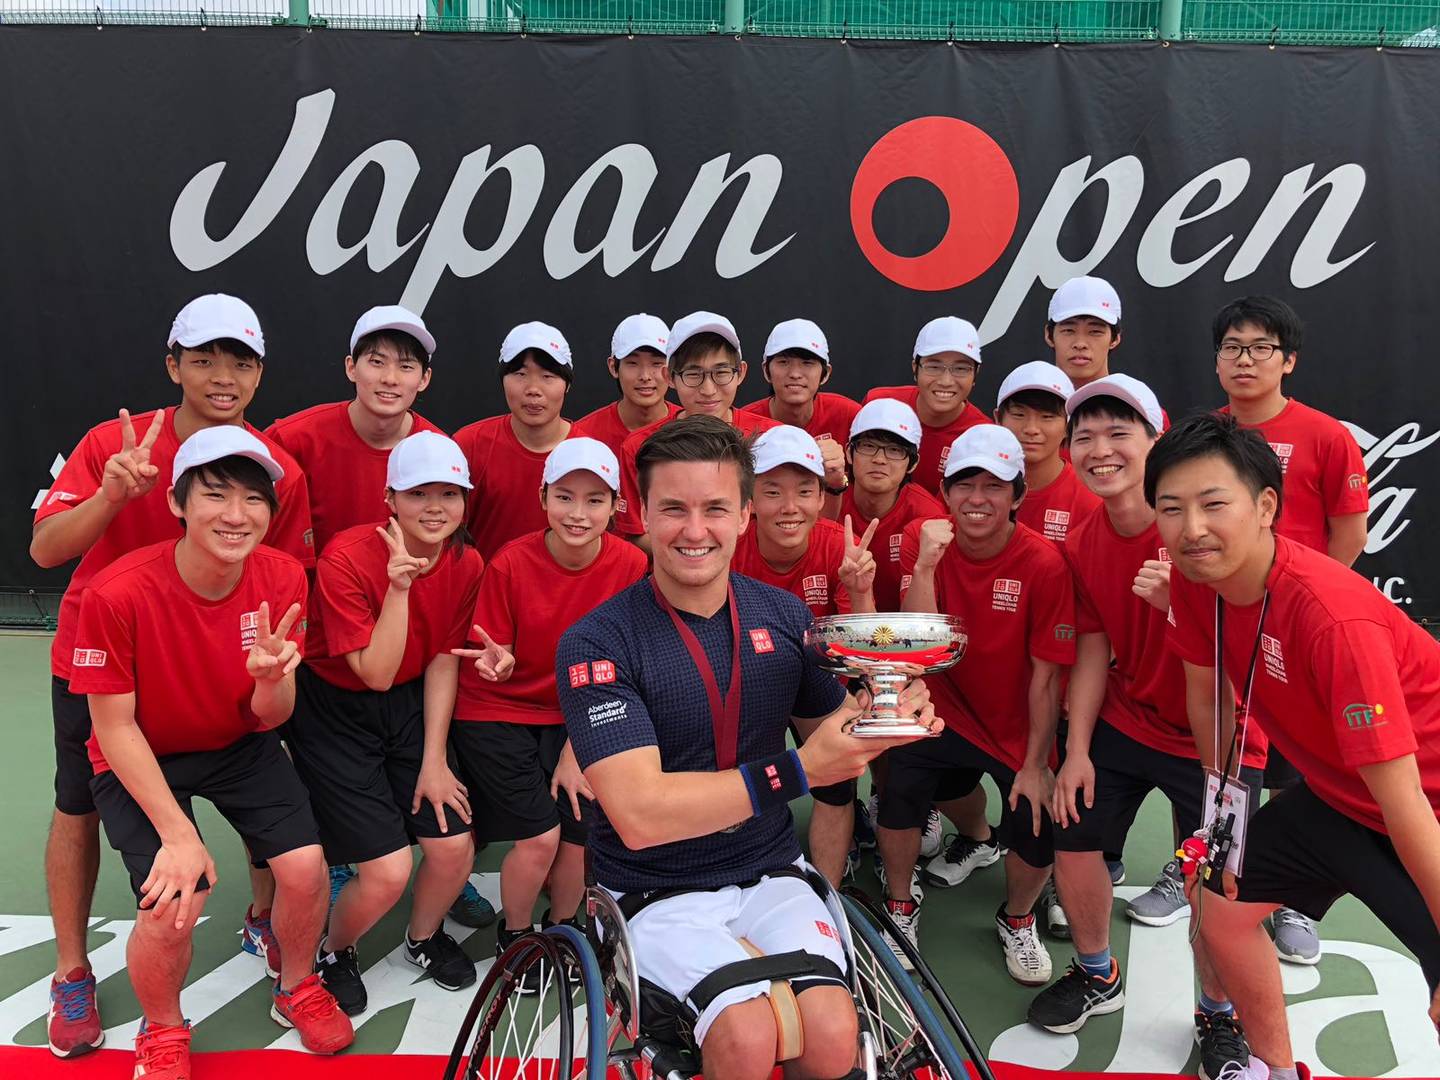 Gordon Reid celebrates victory with trophy at Japan Open Super Series 